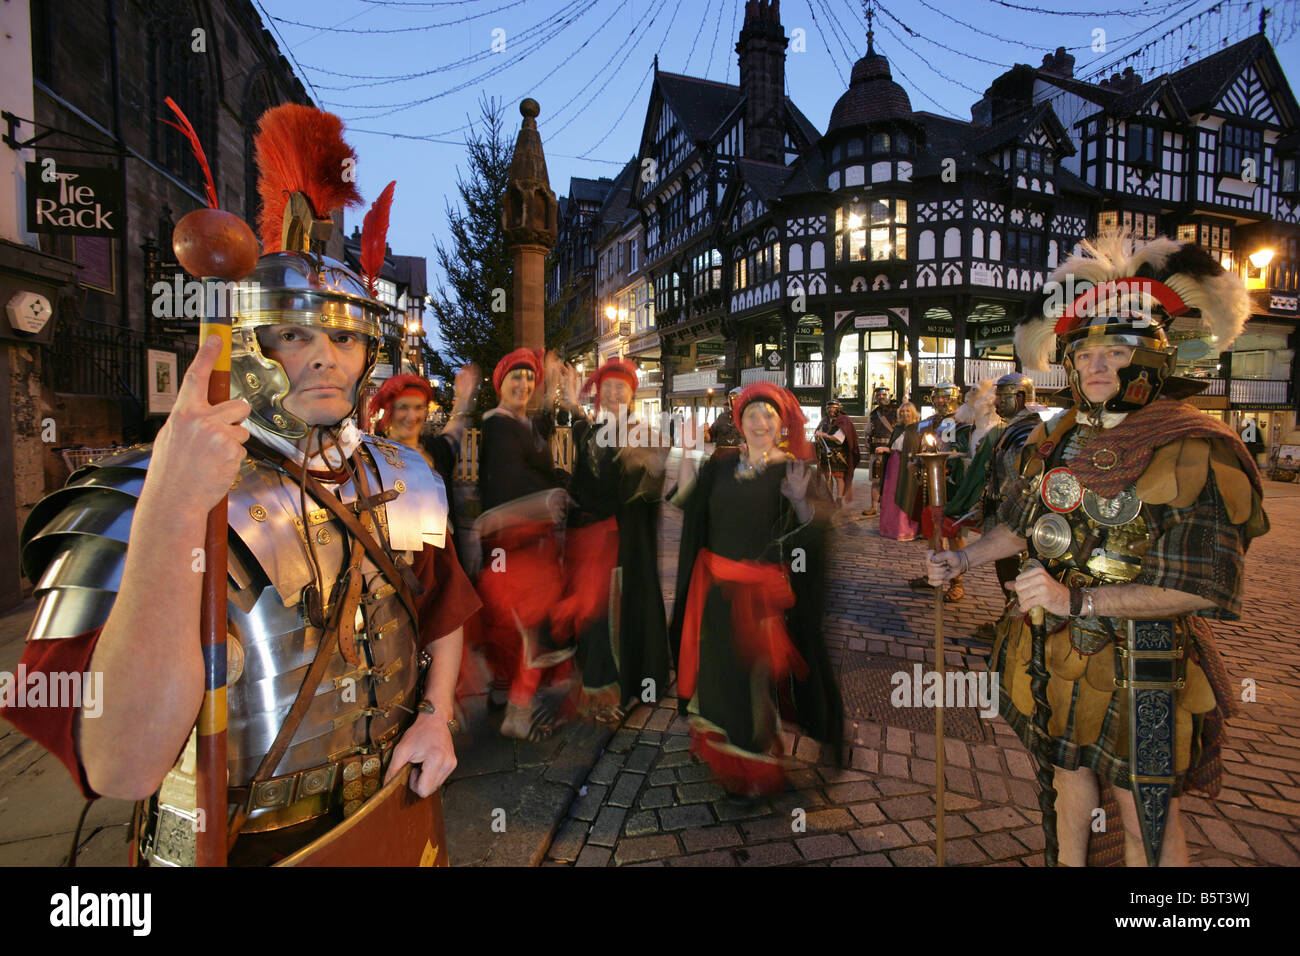 City of Chester, England. Roman Tours conducting a torchlight Christmas parade Saturnalia re-enactment event in the city centre. Stock Photo